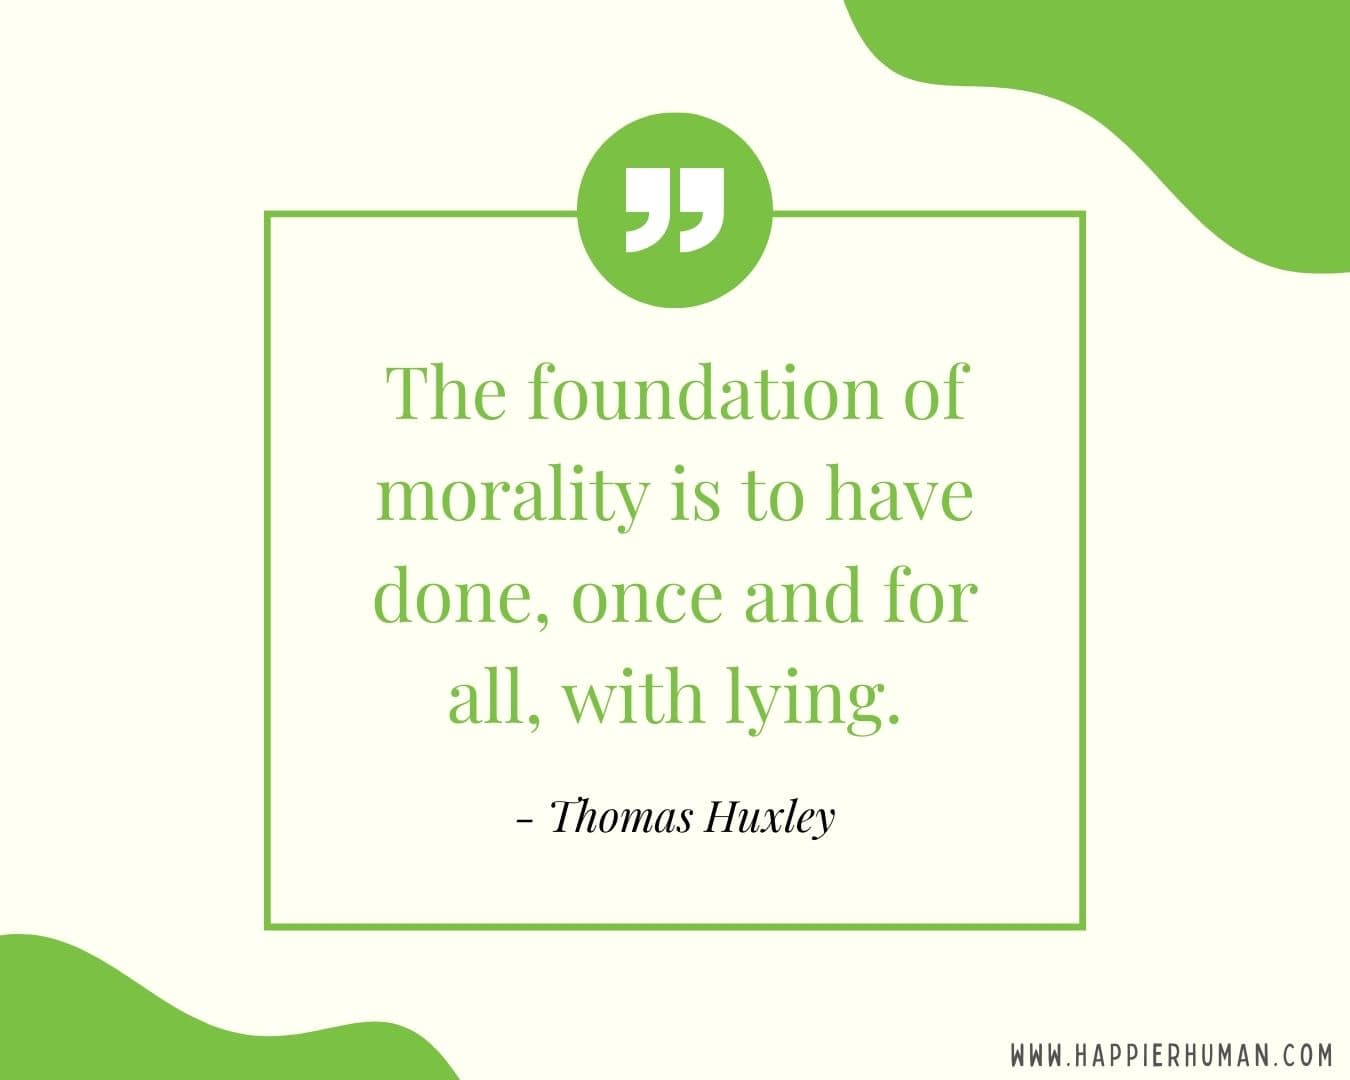 Broken Trust Quotes - “The foundation of morality is to have done, once and for all, with lying.” - Thomas Huxley